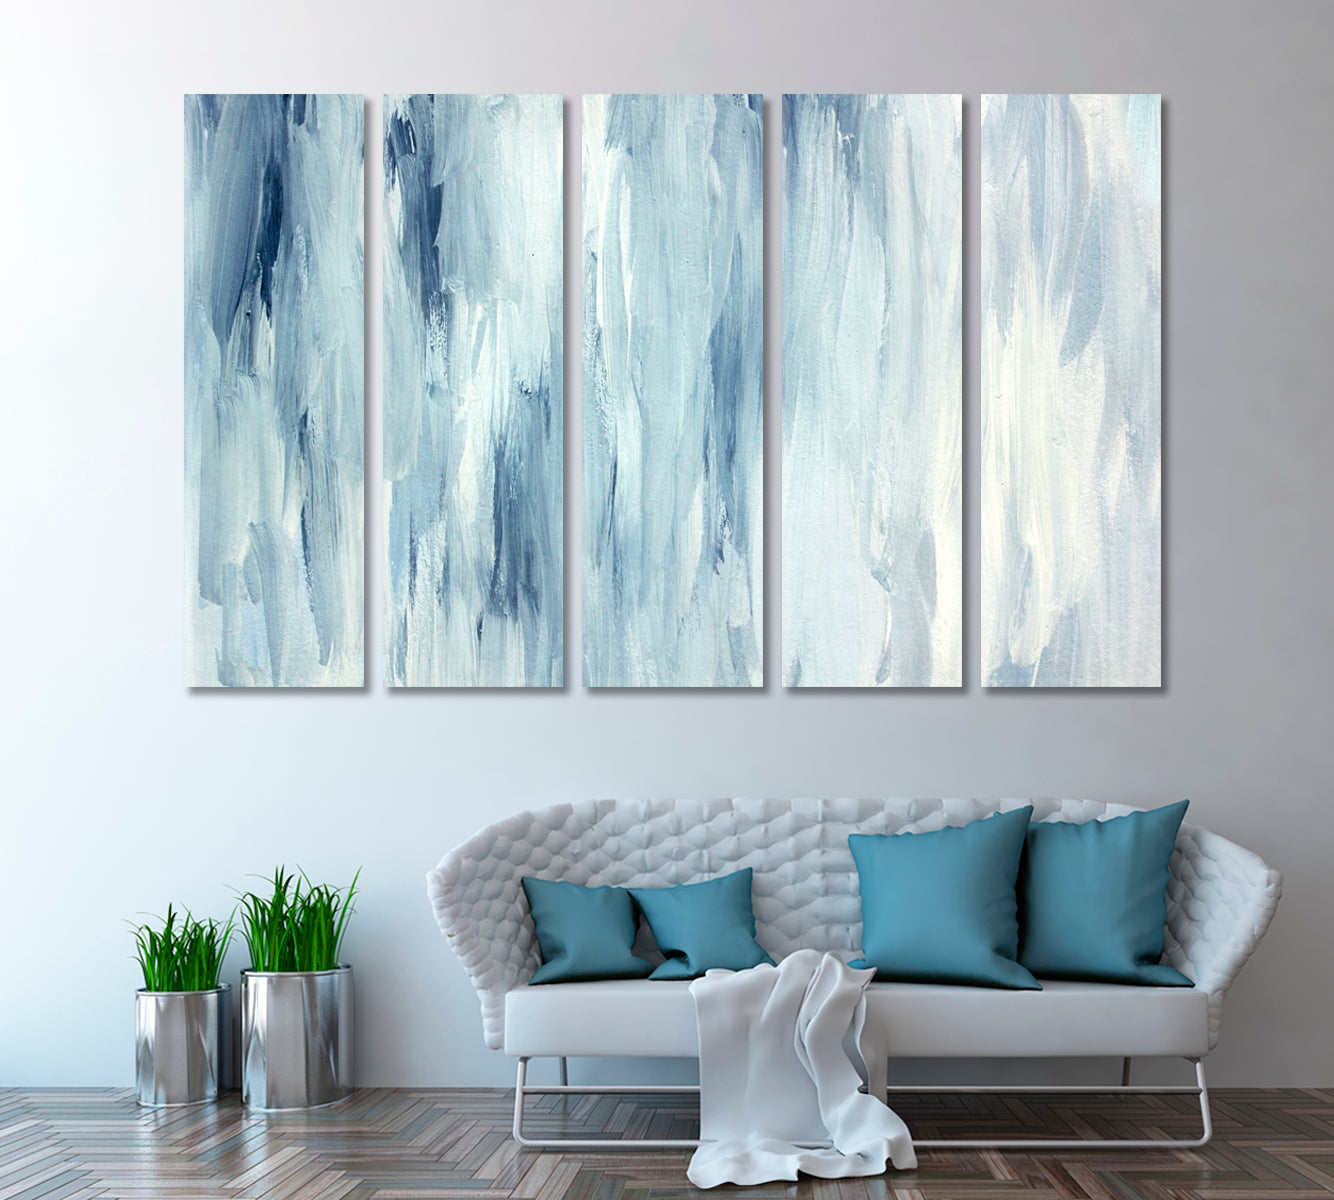 Abstract Minimalist Sea Canvas Print ArtLexy 5 Panels 36"x24" inches 